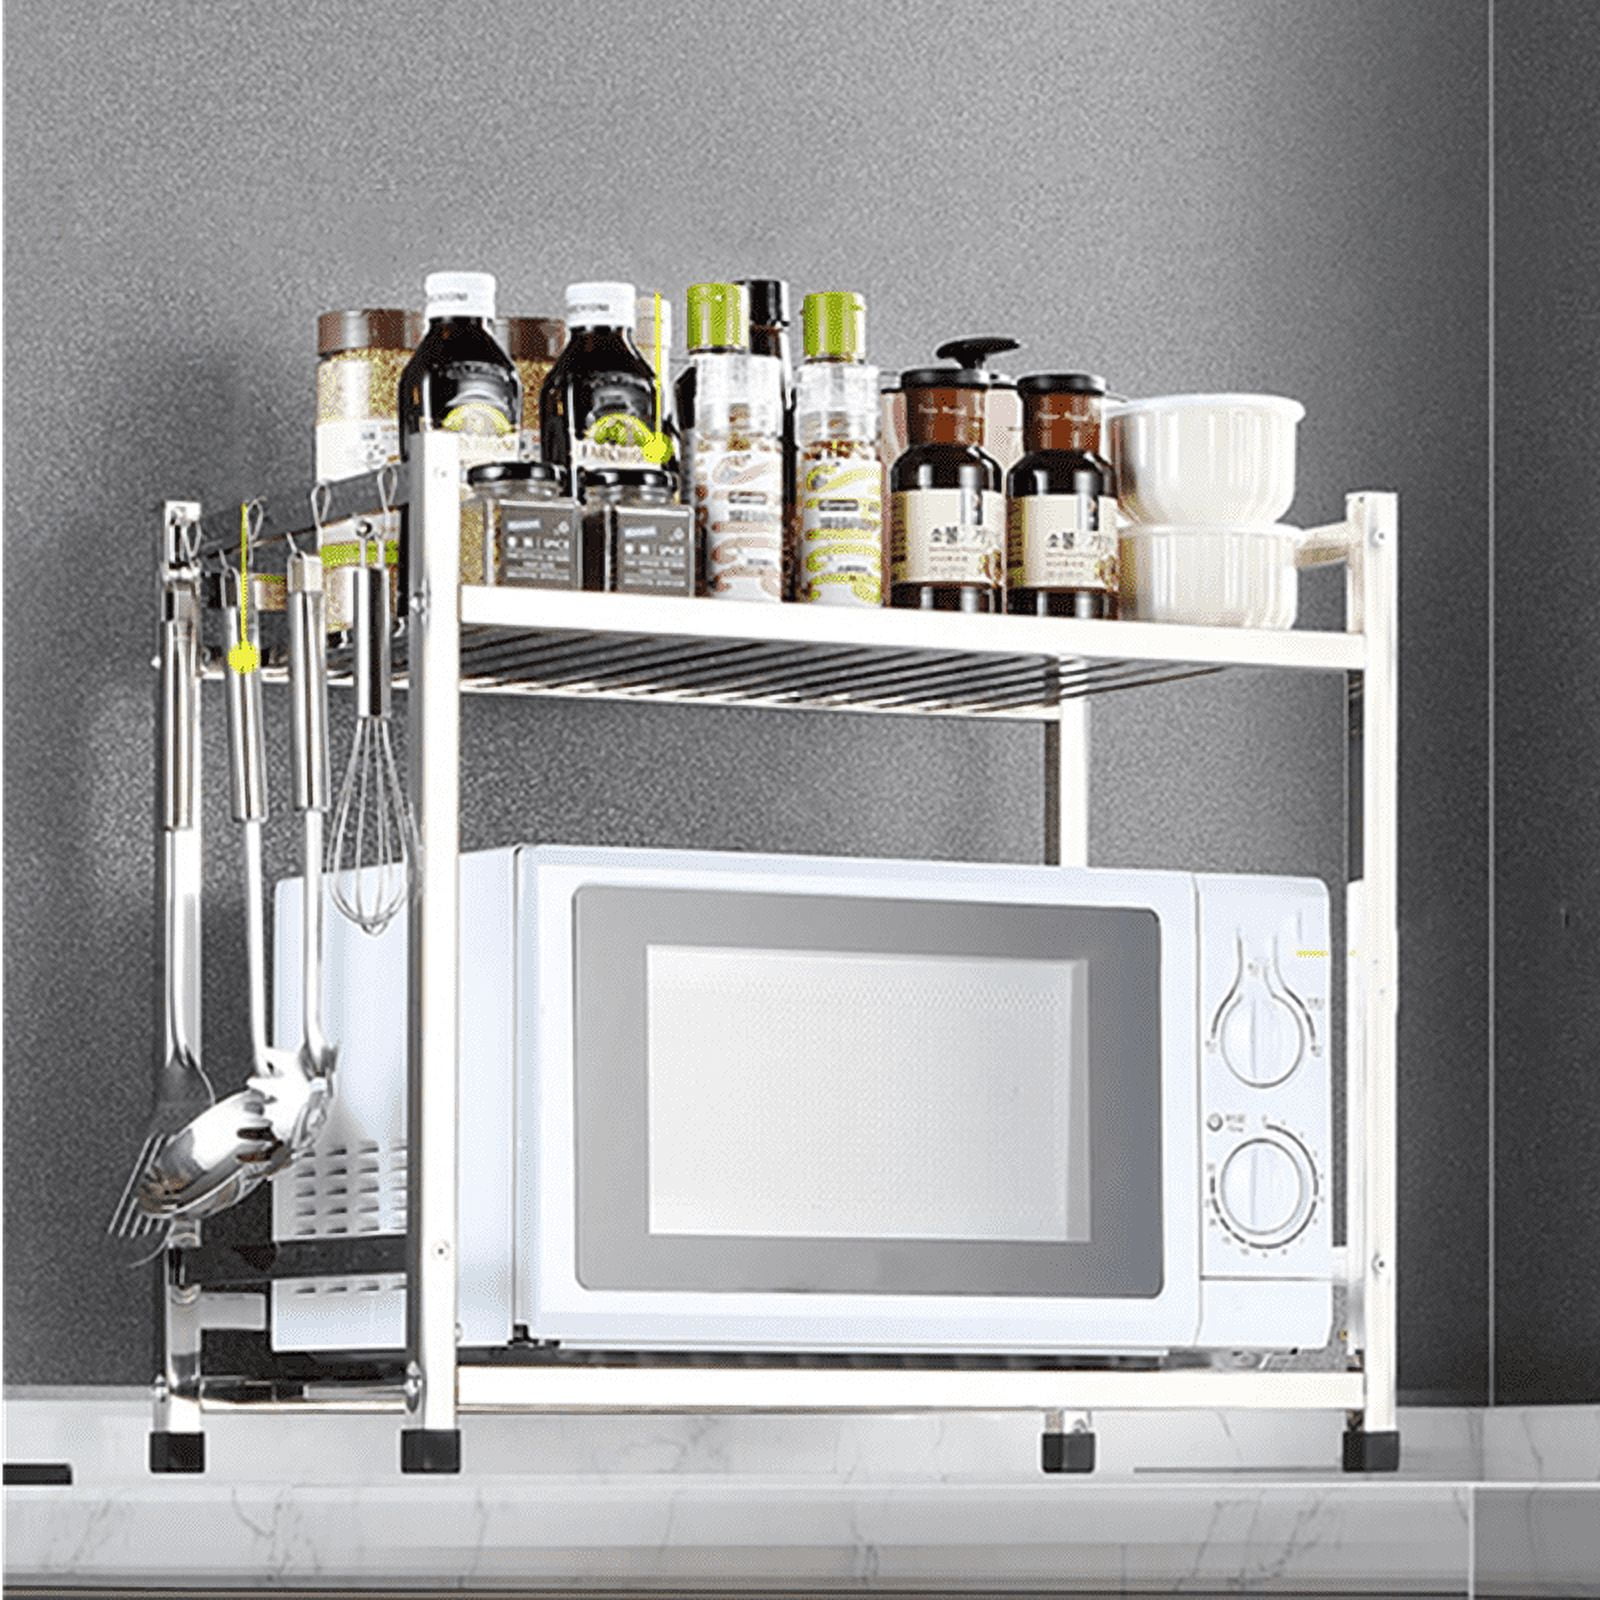 1pc Kitchen Storage Rack Telescopic Microwave Oven Holder, Double Layer  Tabletop Shelf For Home Appliances Organization